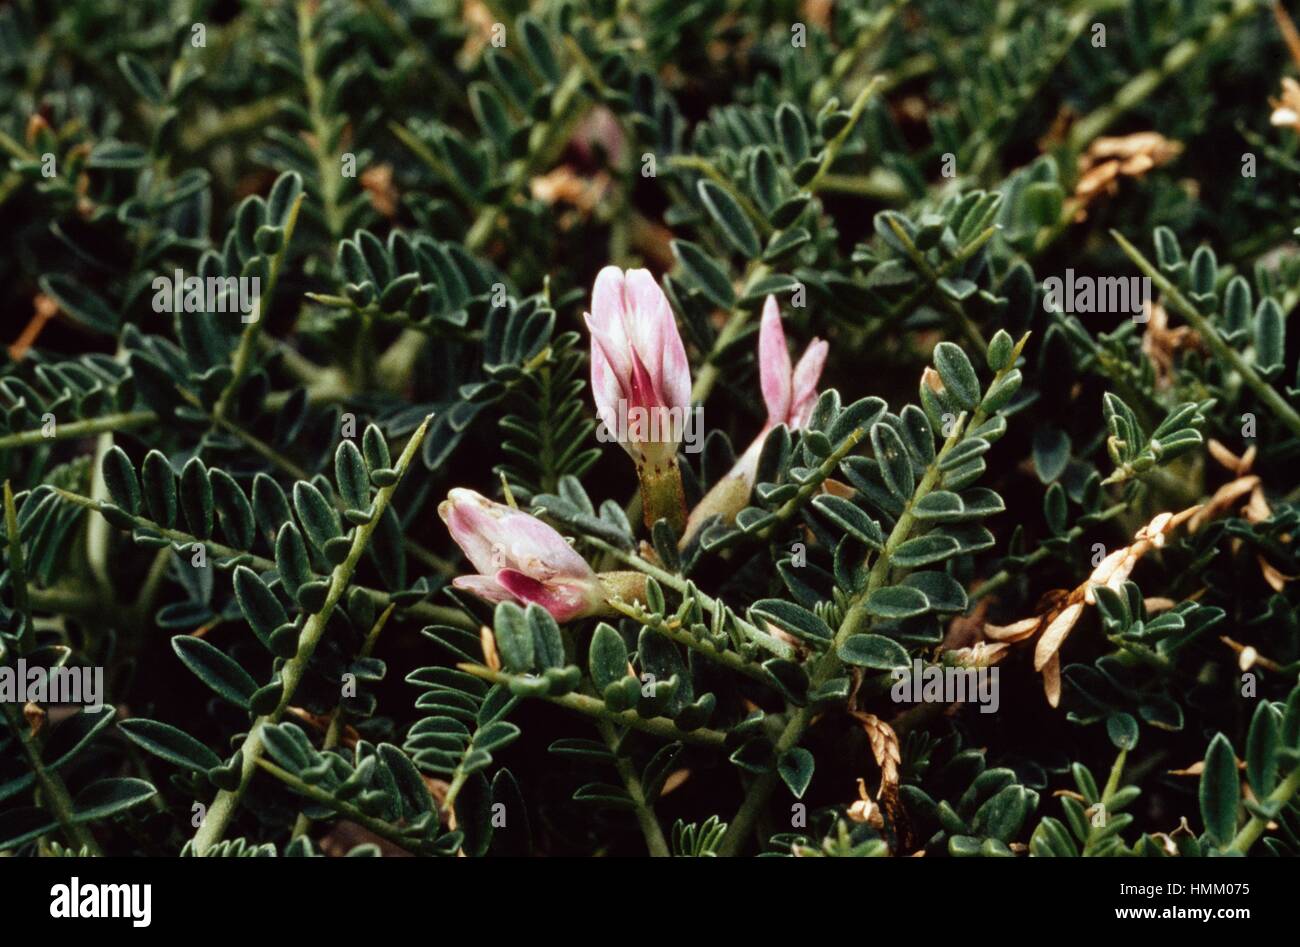 Tragacanth (Astragalus massiliensis or Astragalus tragacantha), Fabaceae. Stock Photo